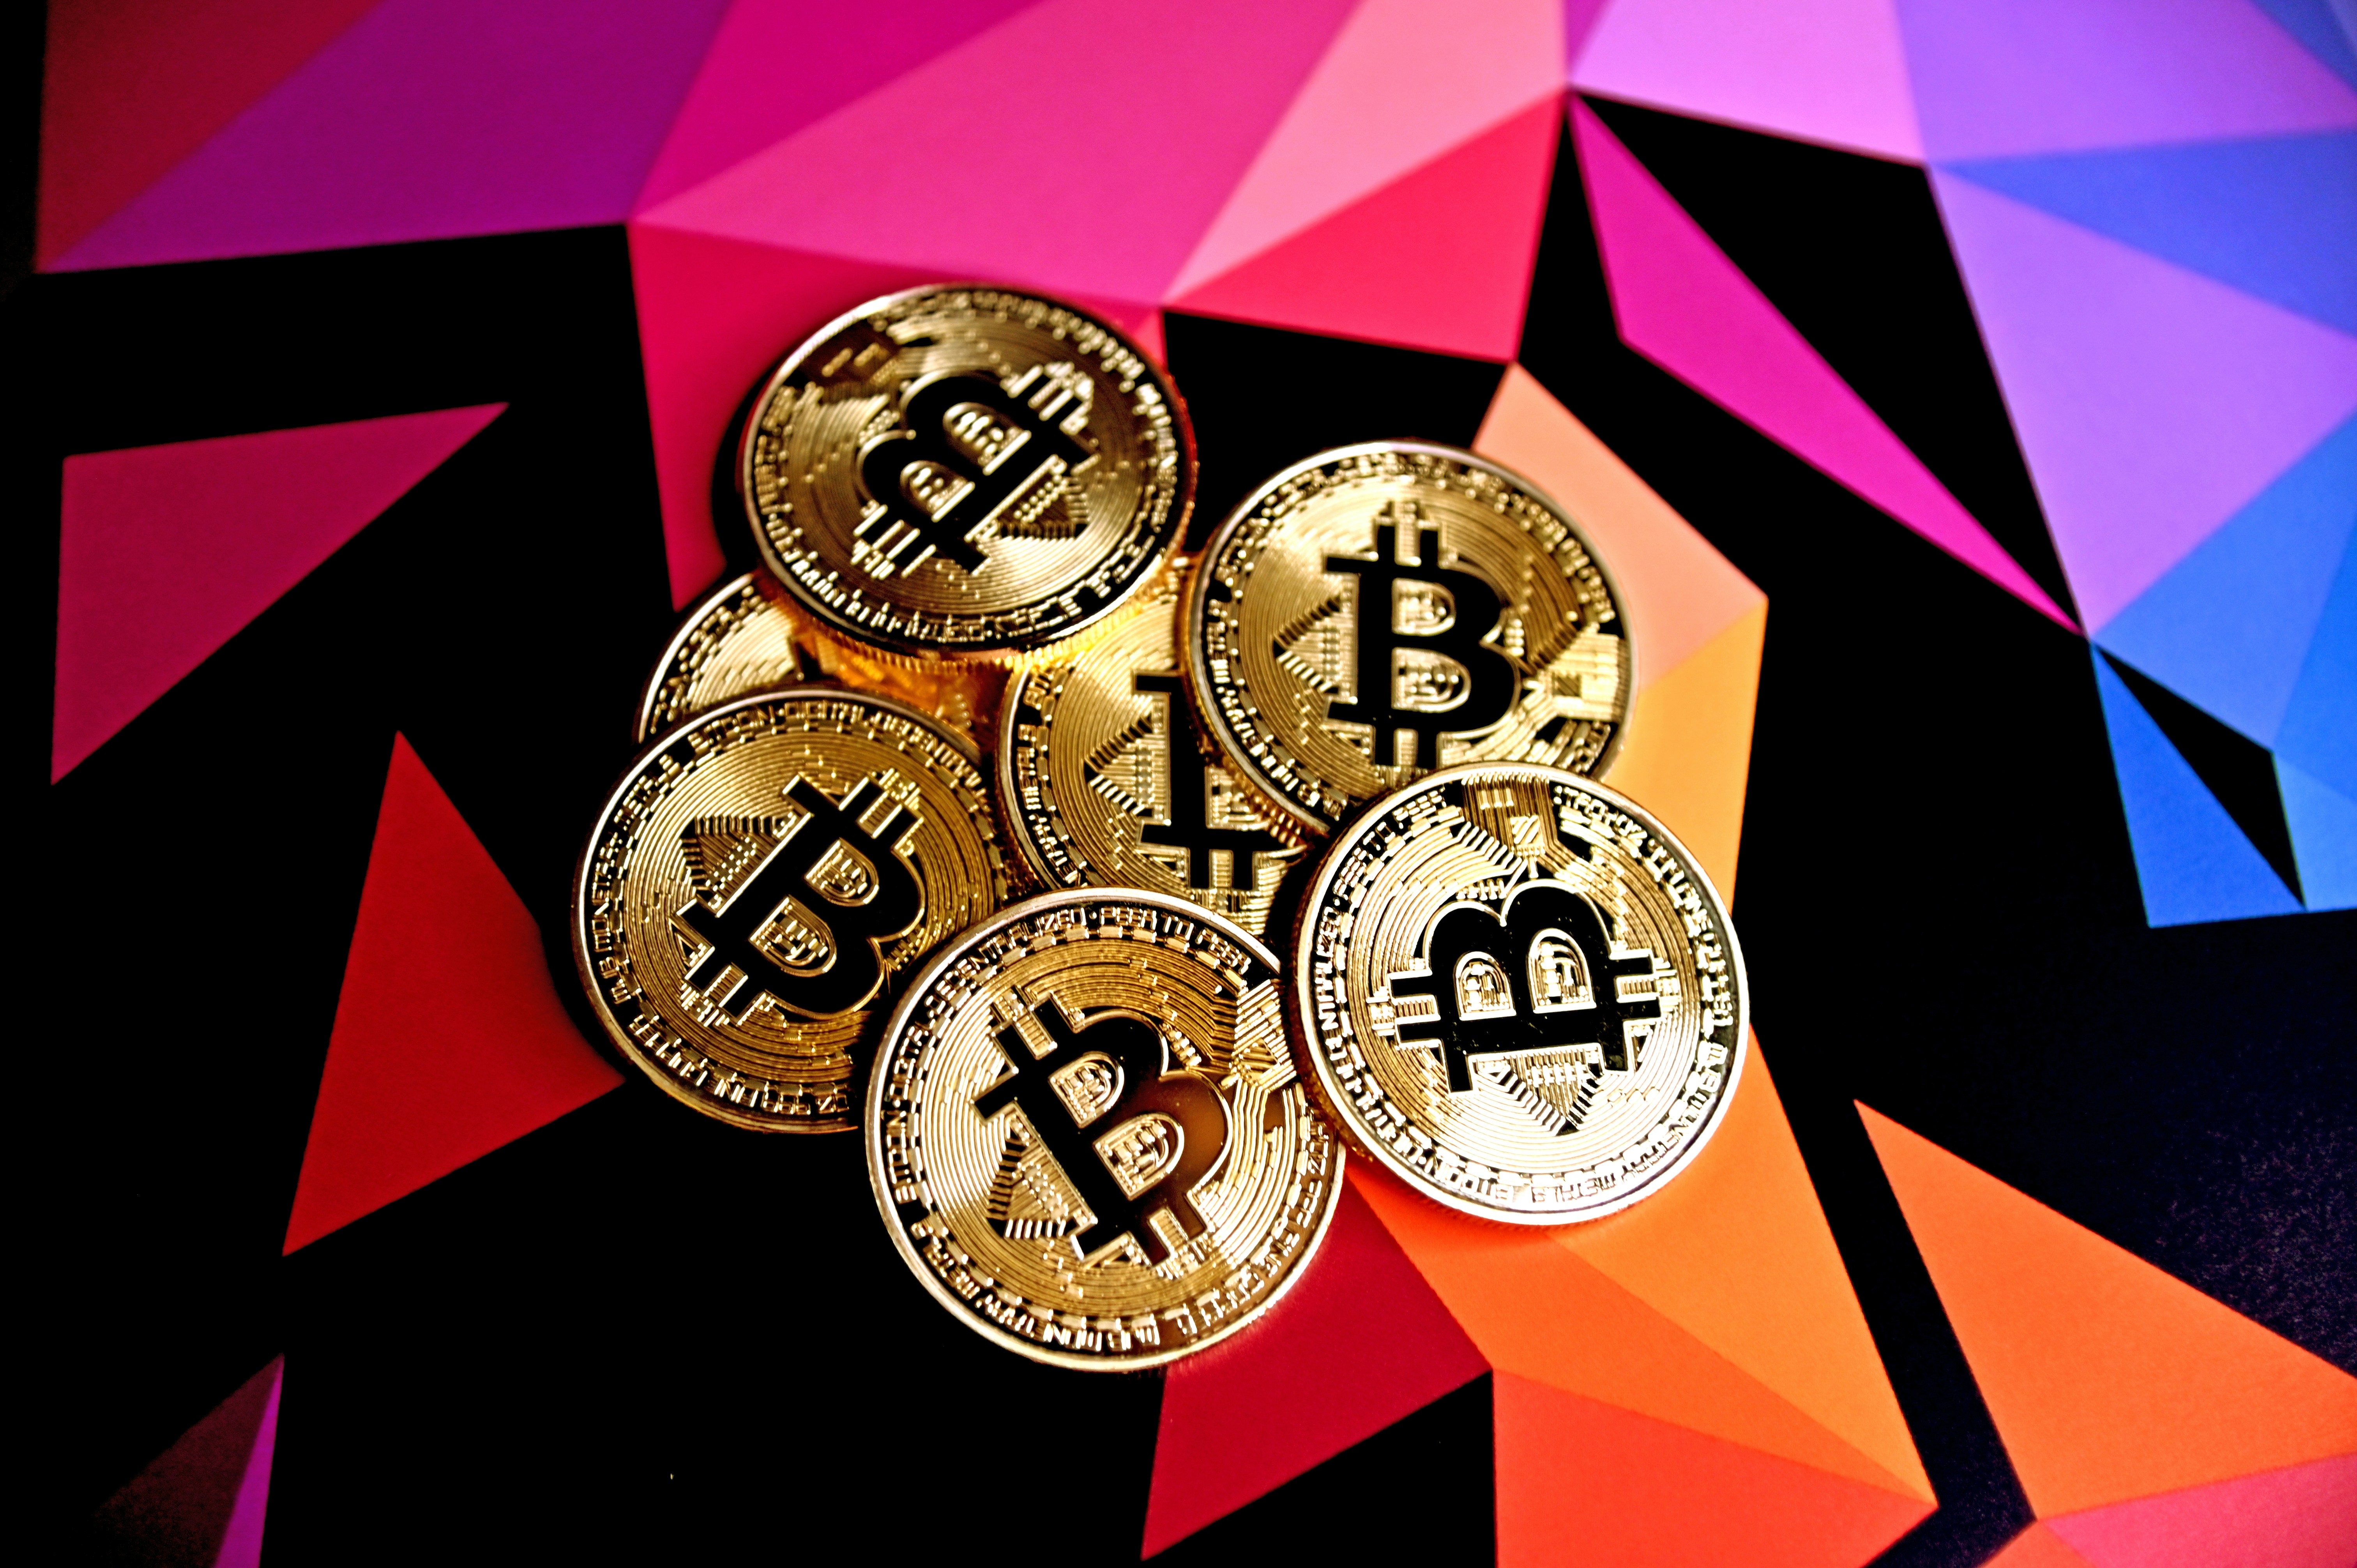 Bitcoins on a multi-colored background.